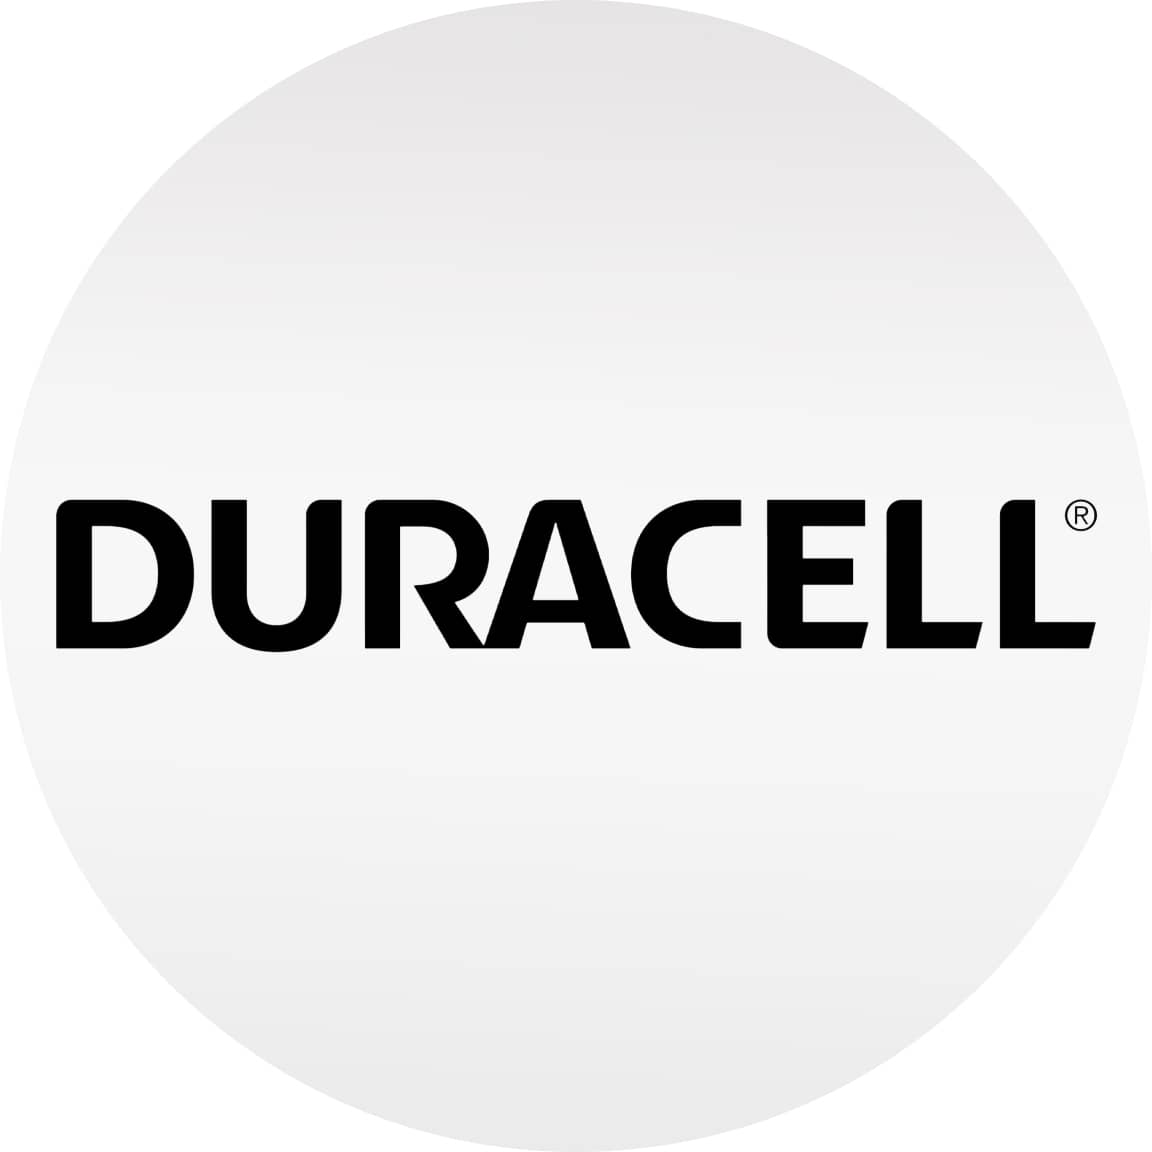 Shop for Duracell® brand products